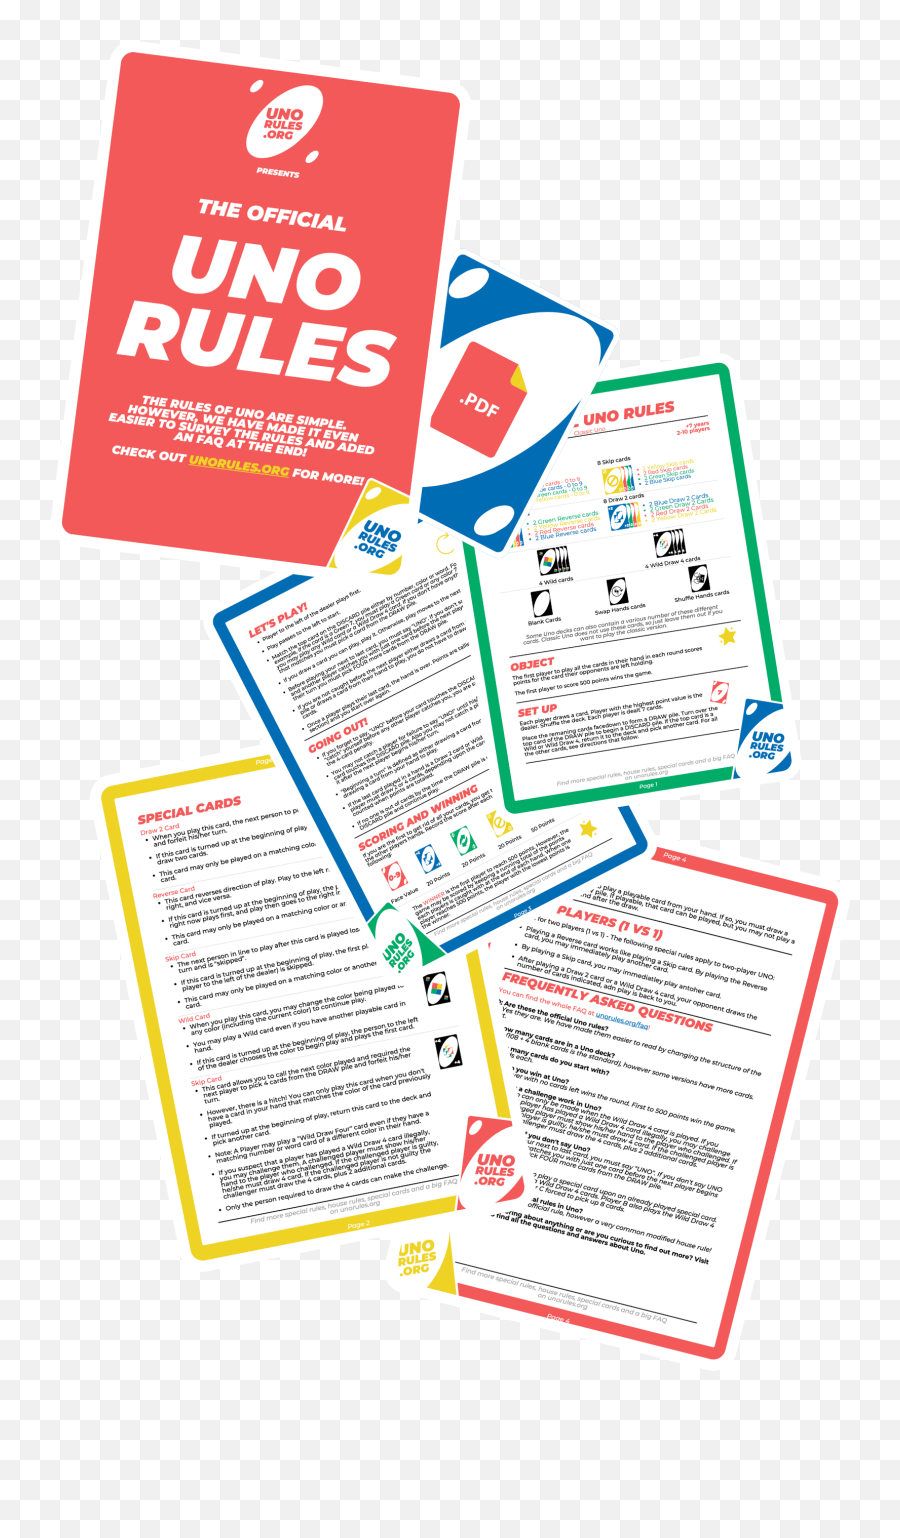 Uno Rules - The Ultimate Uno Rule Guide Read Online Or Emoji,Thinking Emojis Drawn Poorly